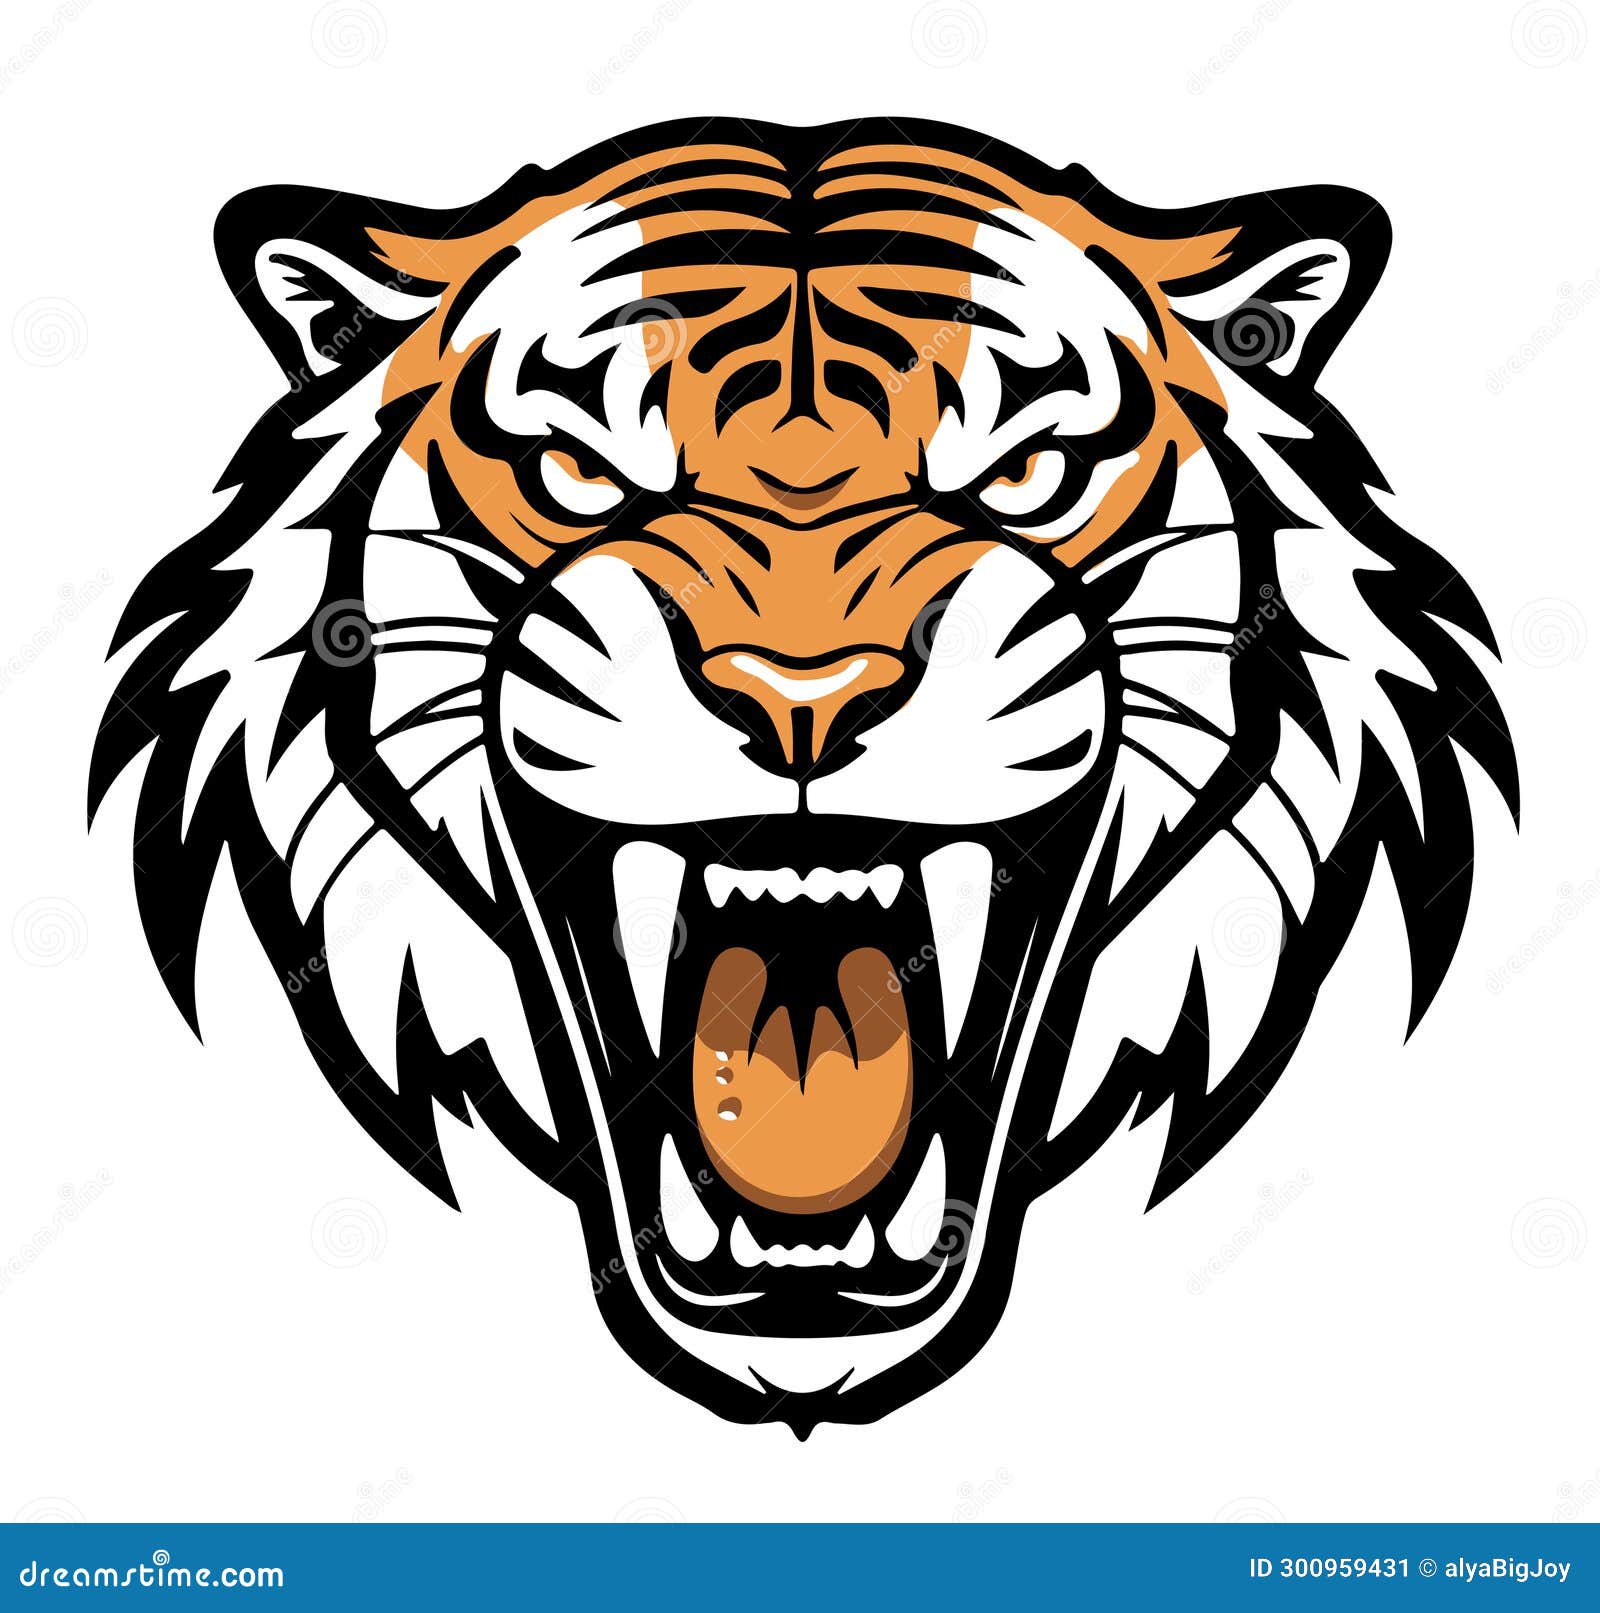 Angry Tiger Growling Sketch Stock Illustration - Illustration of face ...